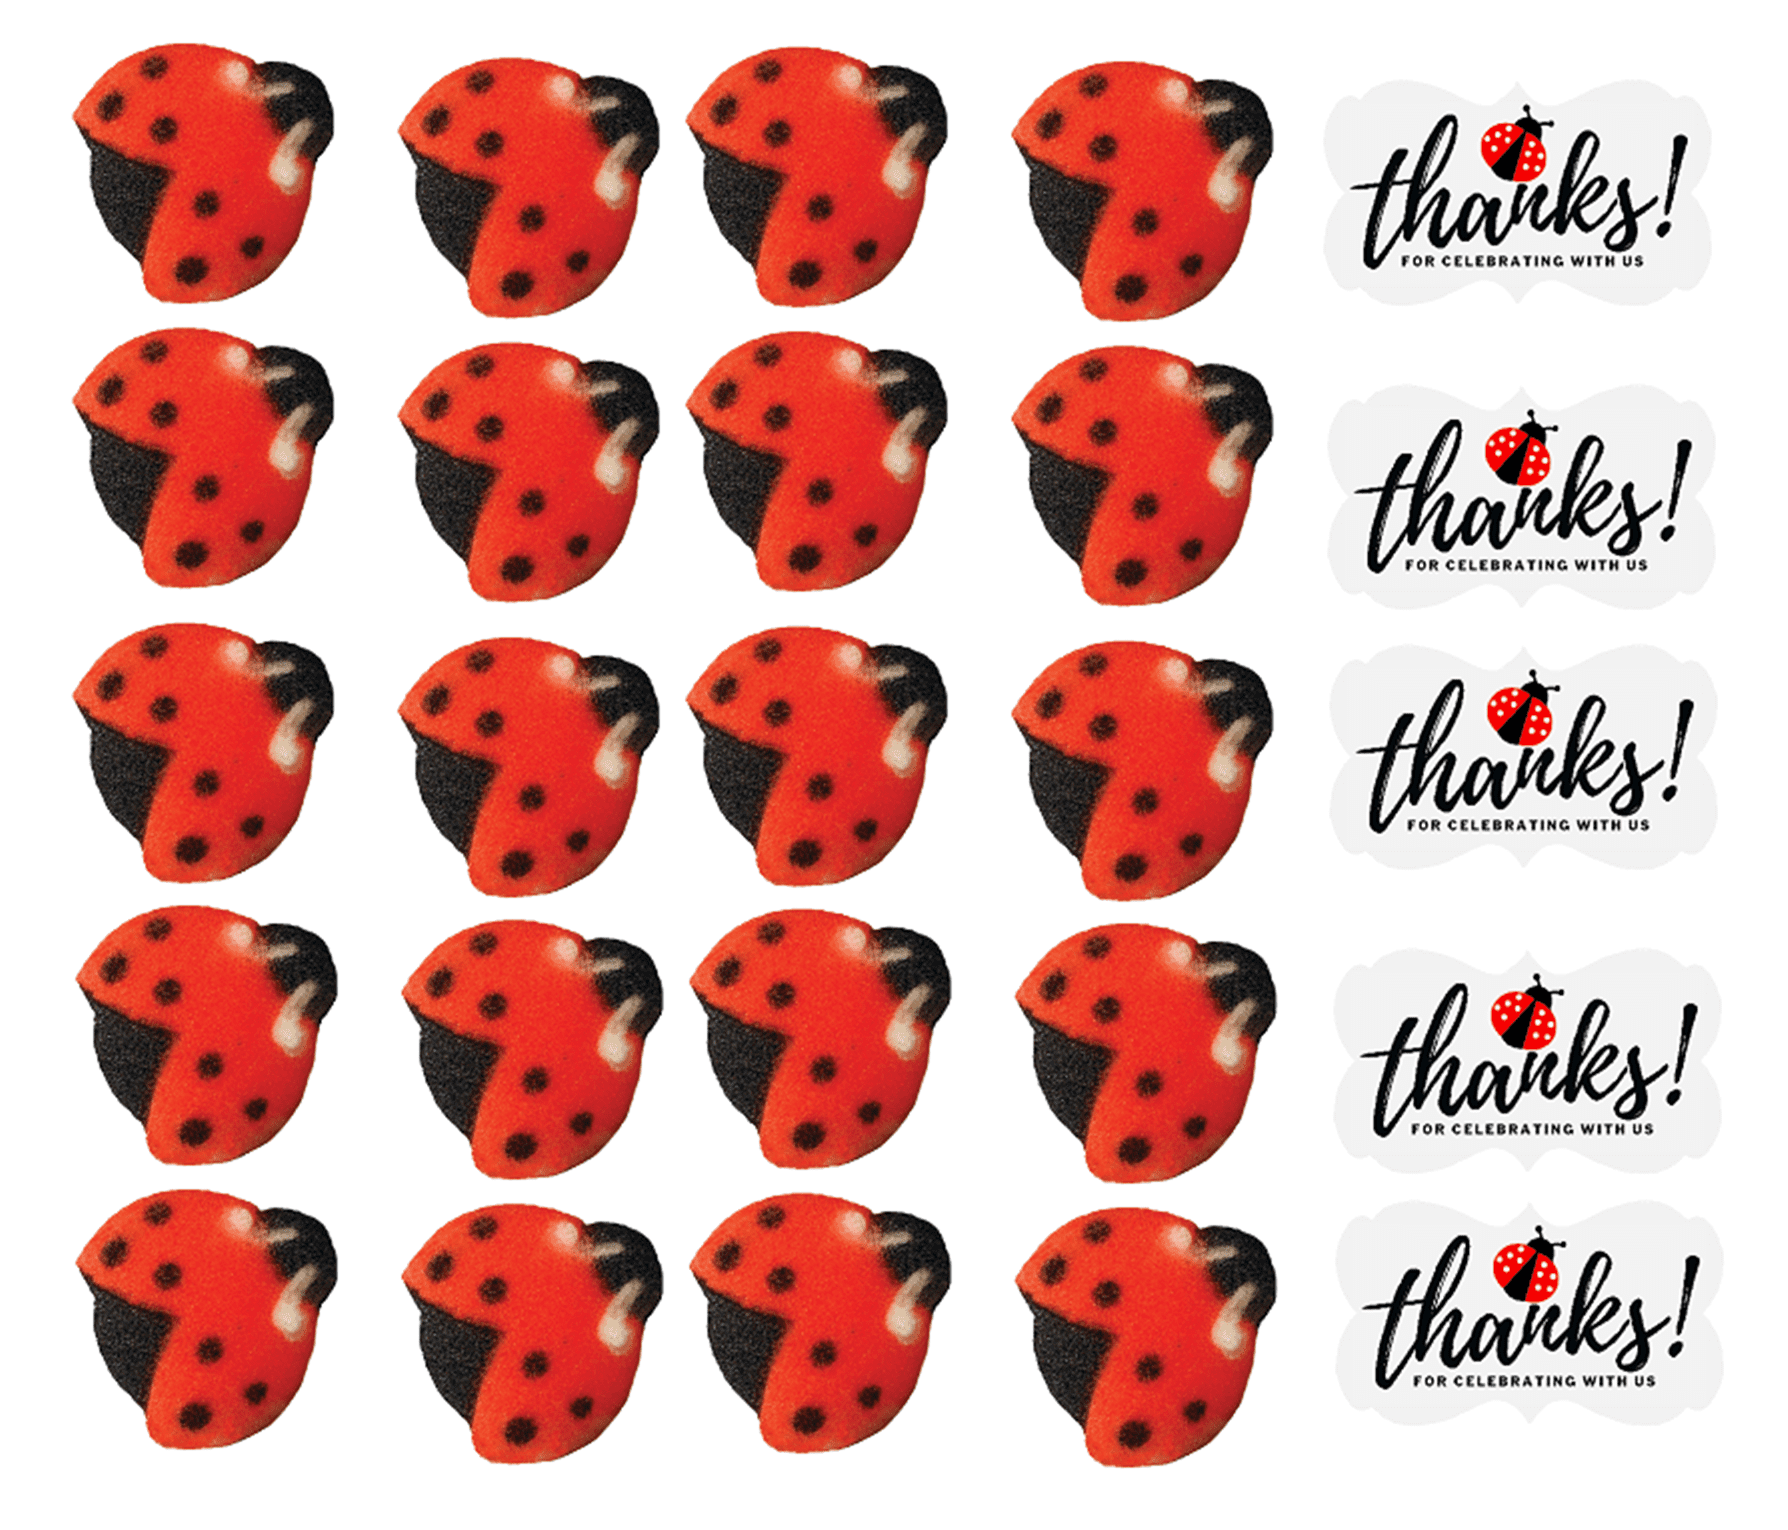 Ladybug Birthday Baby Shower Party Decoration Supplies Spring Party Decor LILIPARTY 24Pcs Glitter Ladybug Cupcake Toppers Flowers Mushroom Cupcake Toppers Garden Party Cupcake Picks 